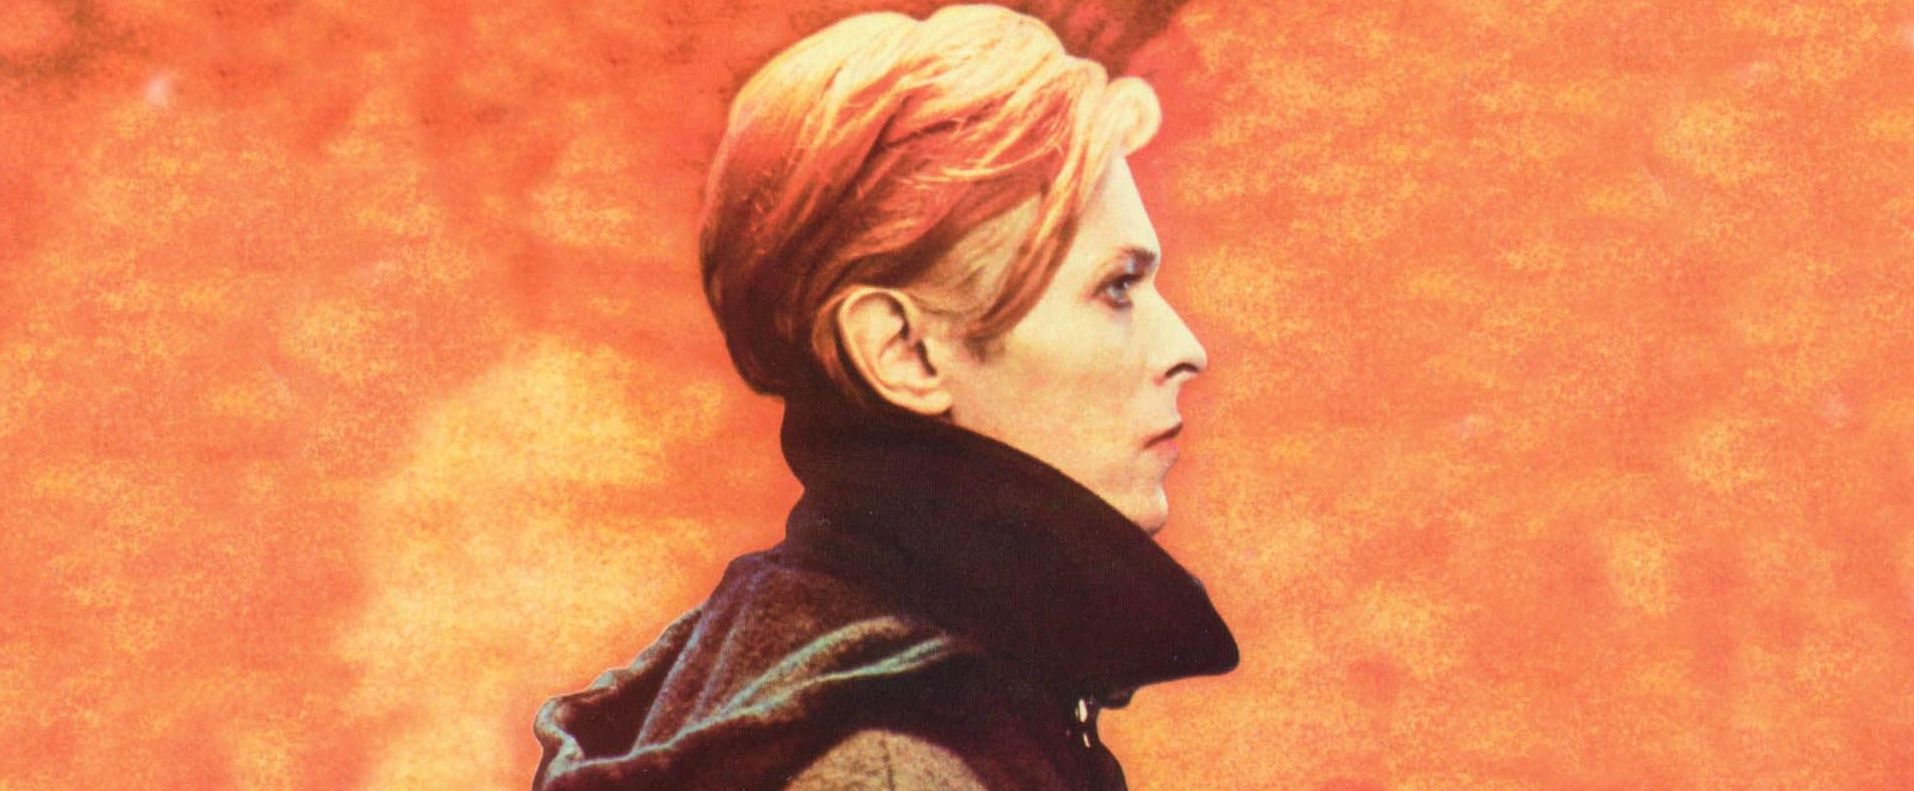 Listen to Bowie's previously unheard John Lennon and Bob Dylan covers